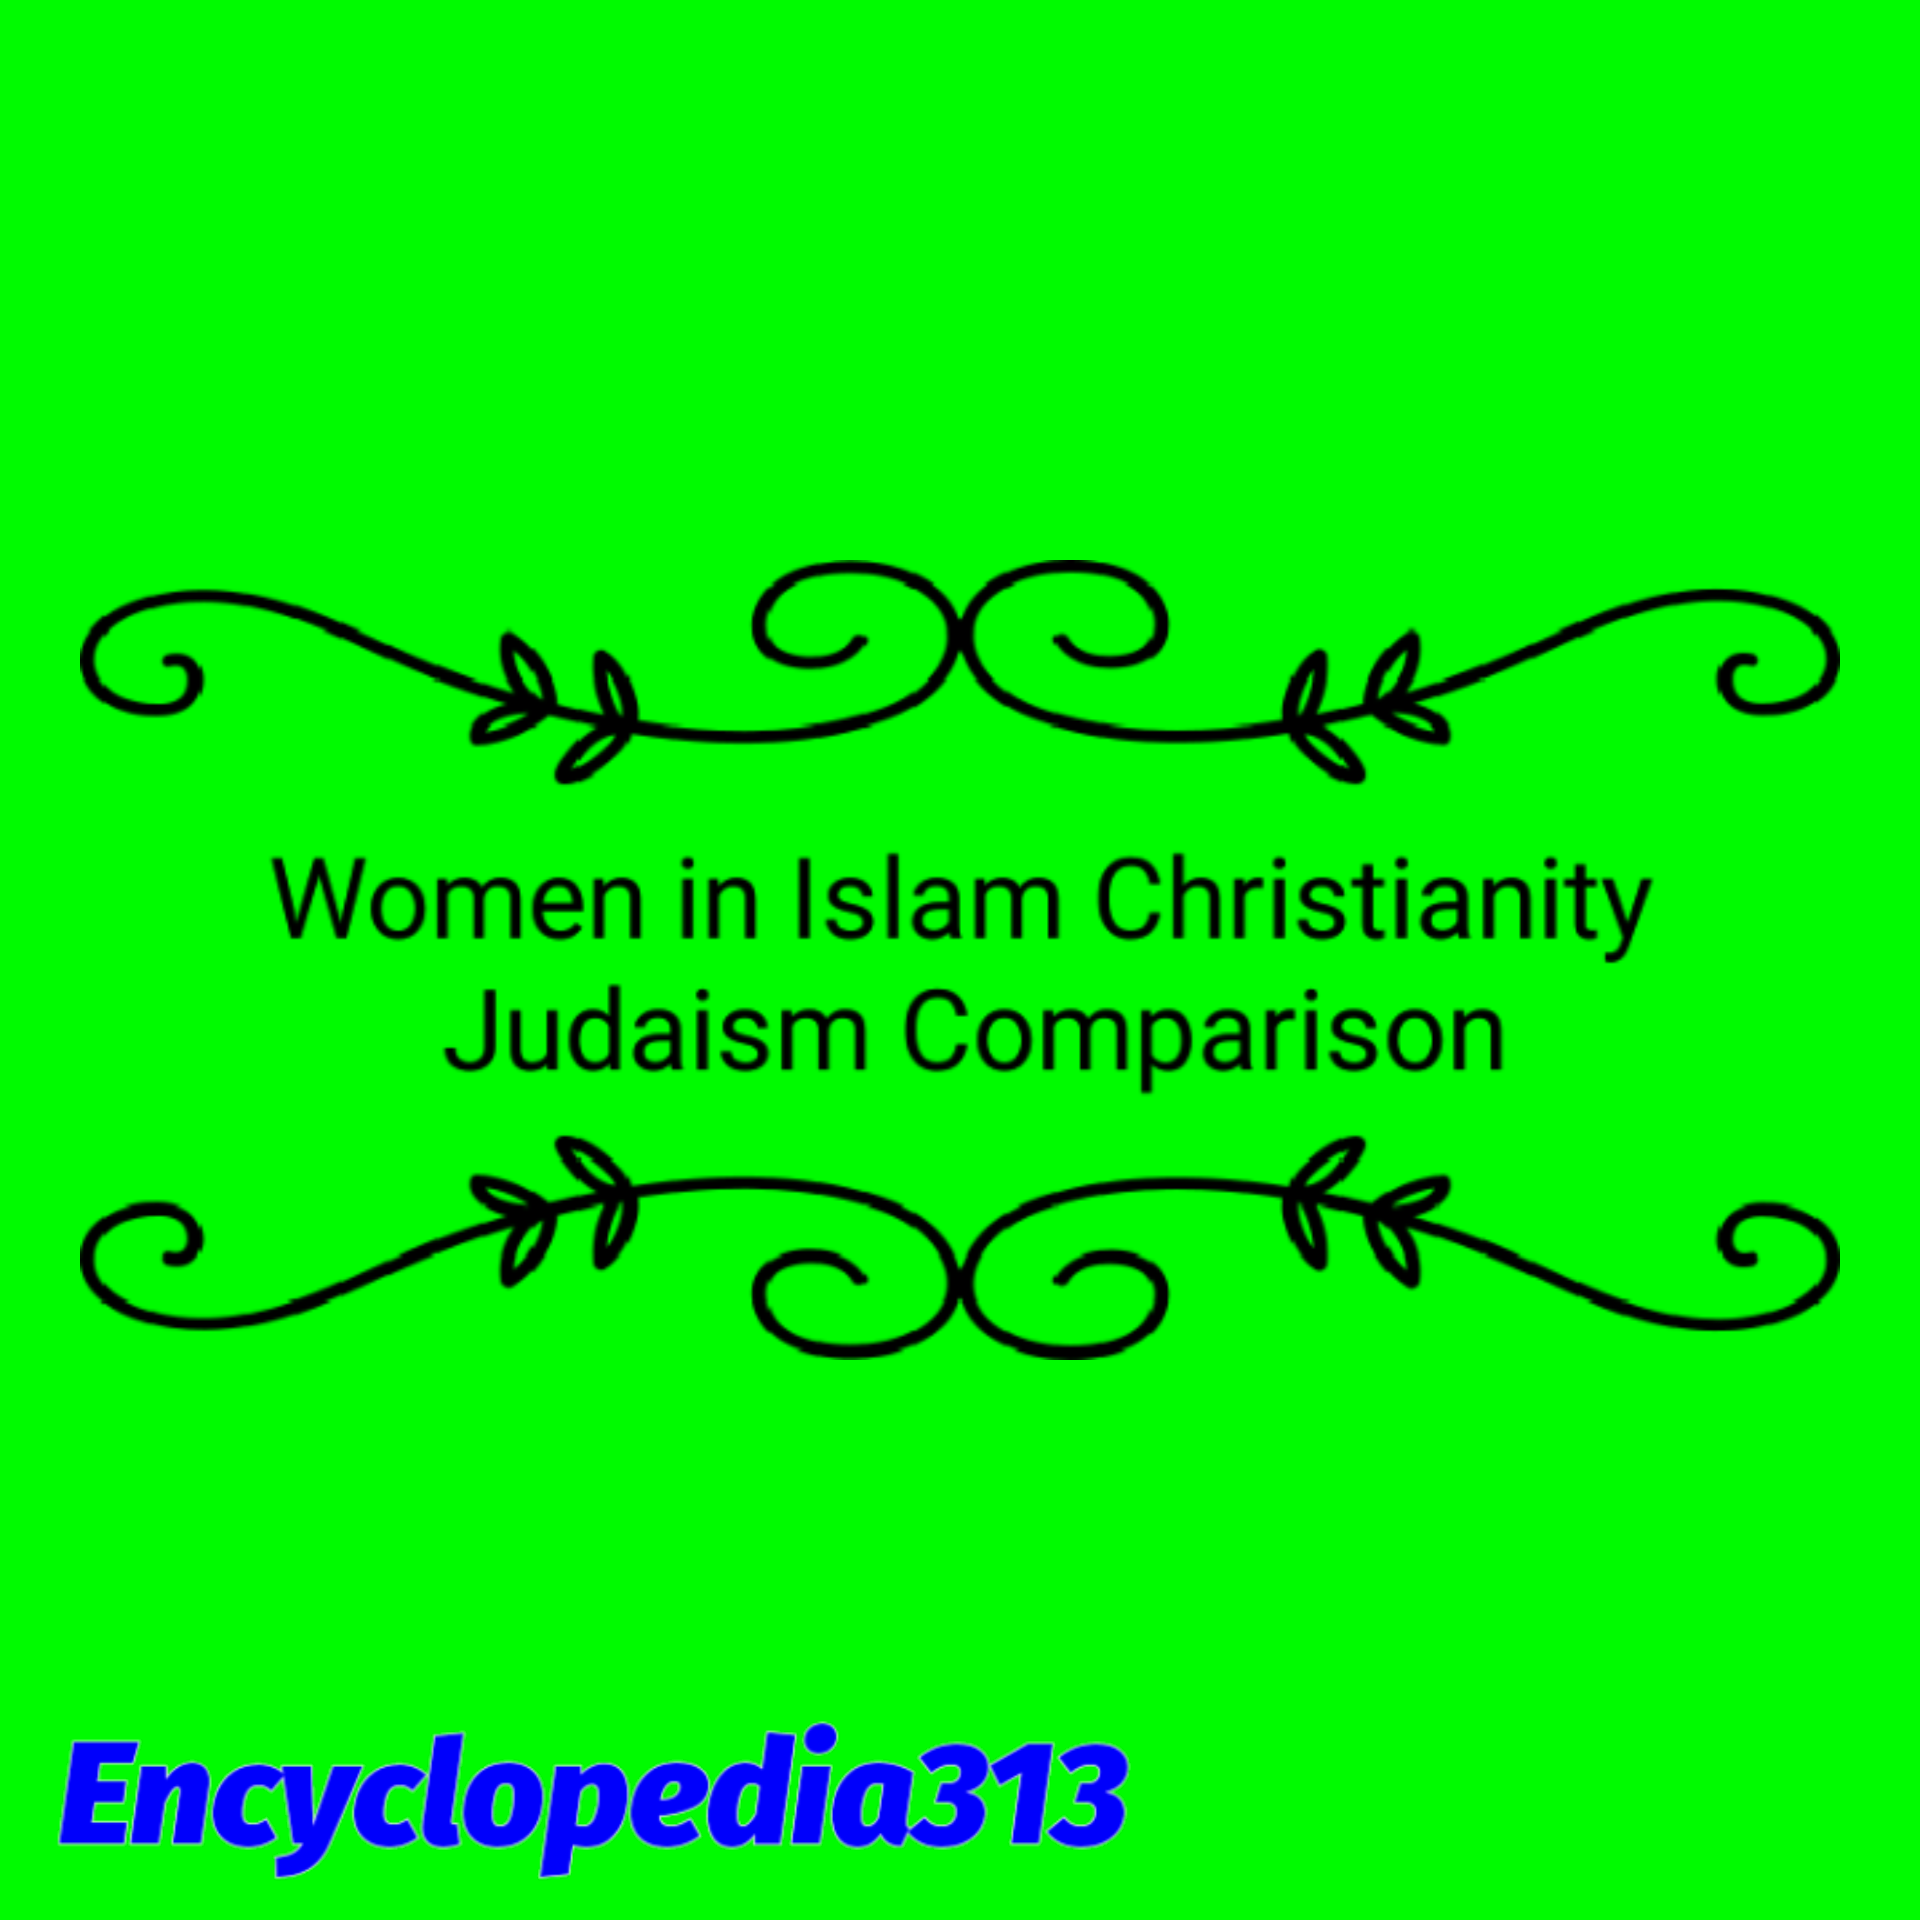 Women in Islam Comparing Judaism to Christianity